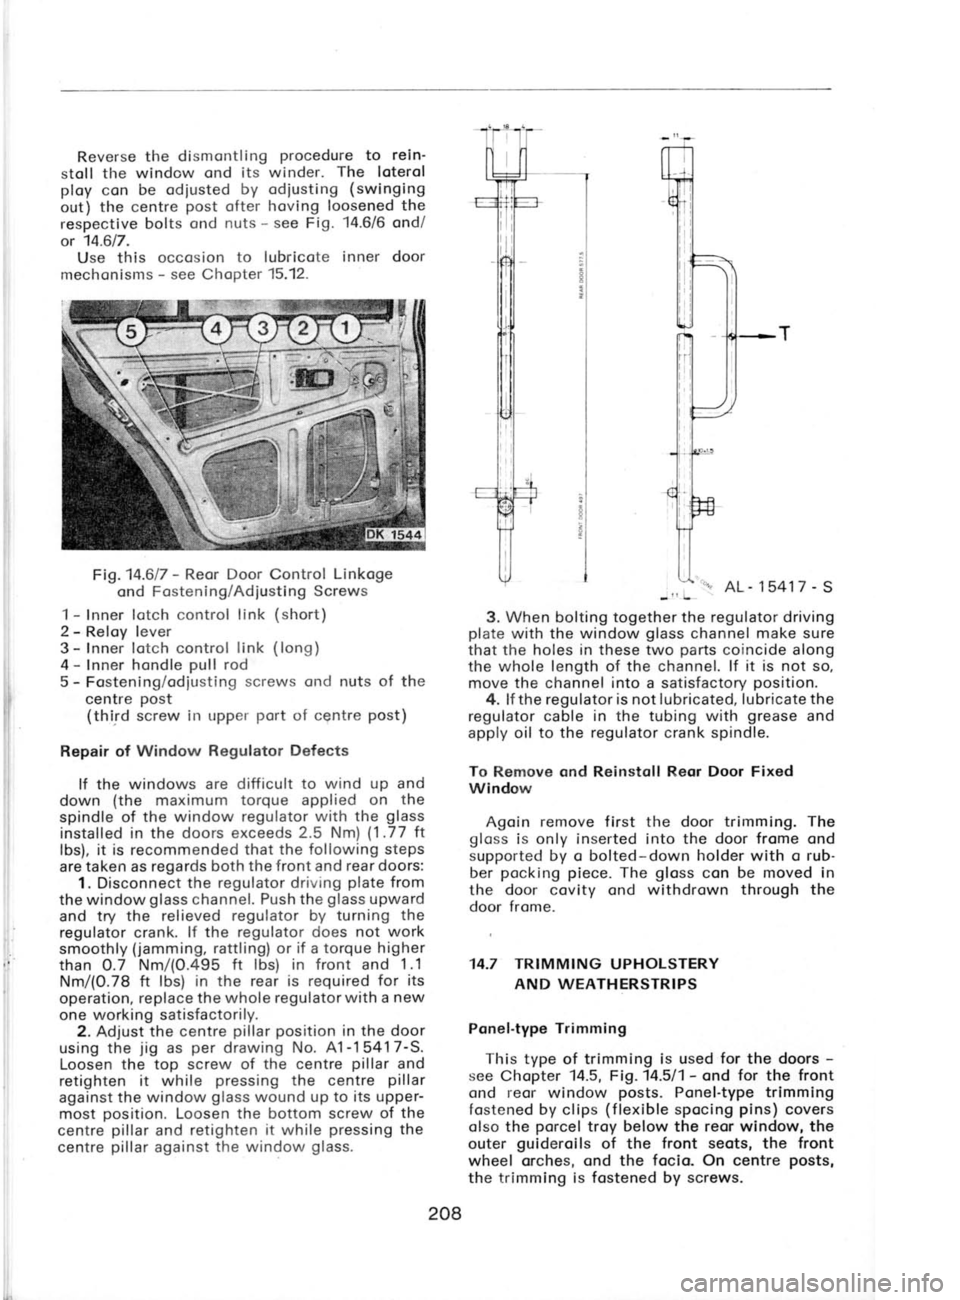 SKODA 105S 1980  Workshop Manual Reverse 
the 
dismontling  procedure 
to rein
stoll  tl-re window  ond its winder.  The 
loterol
ploy  con be odiusted  by  odiusting  (swinging
out) the centre  post 
ofter  hoving  loosened the
res